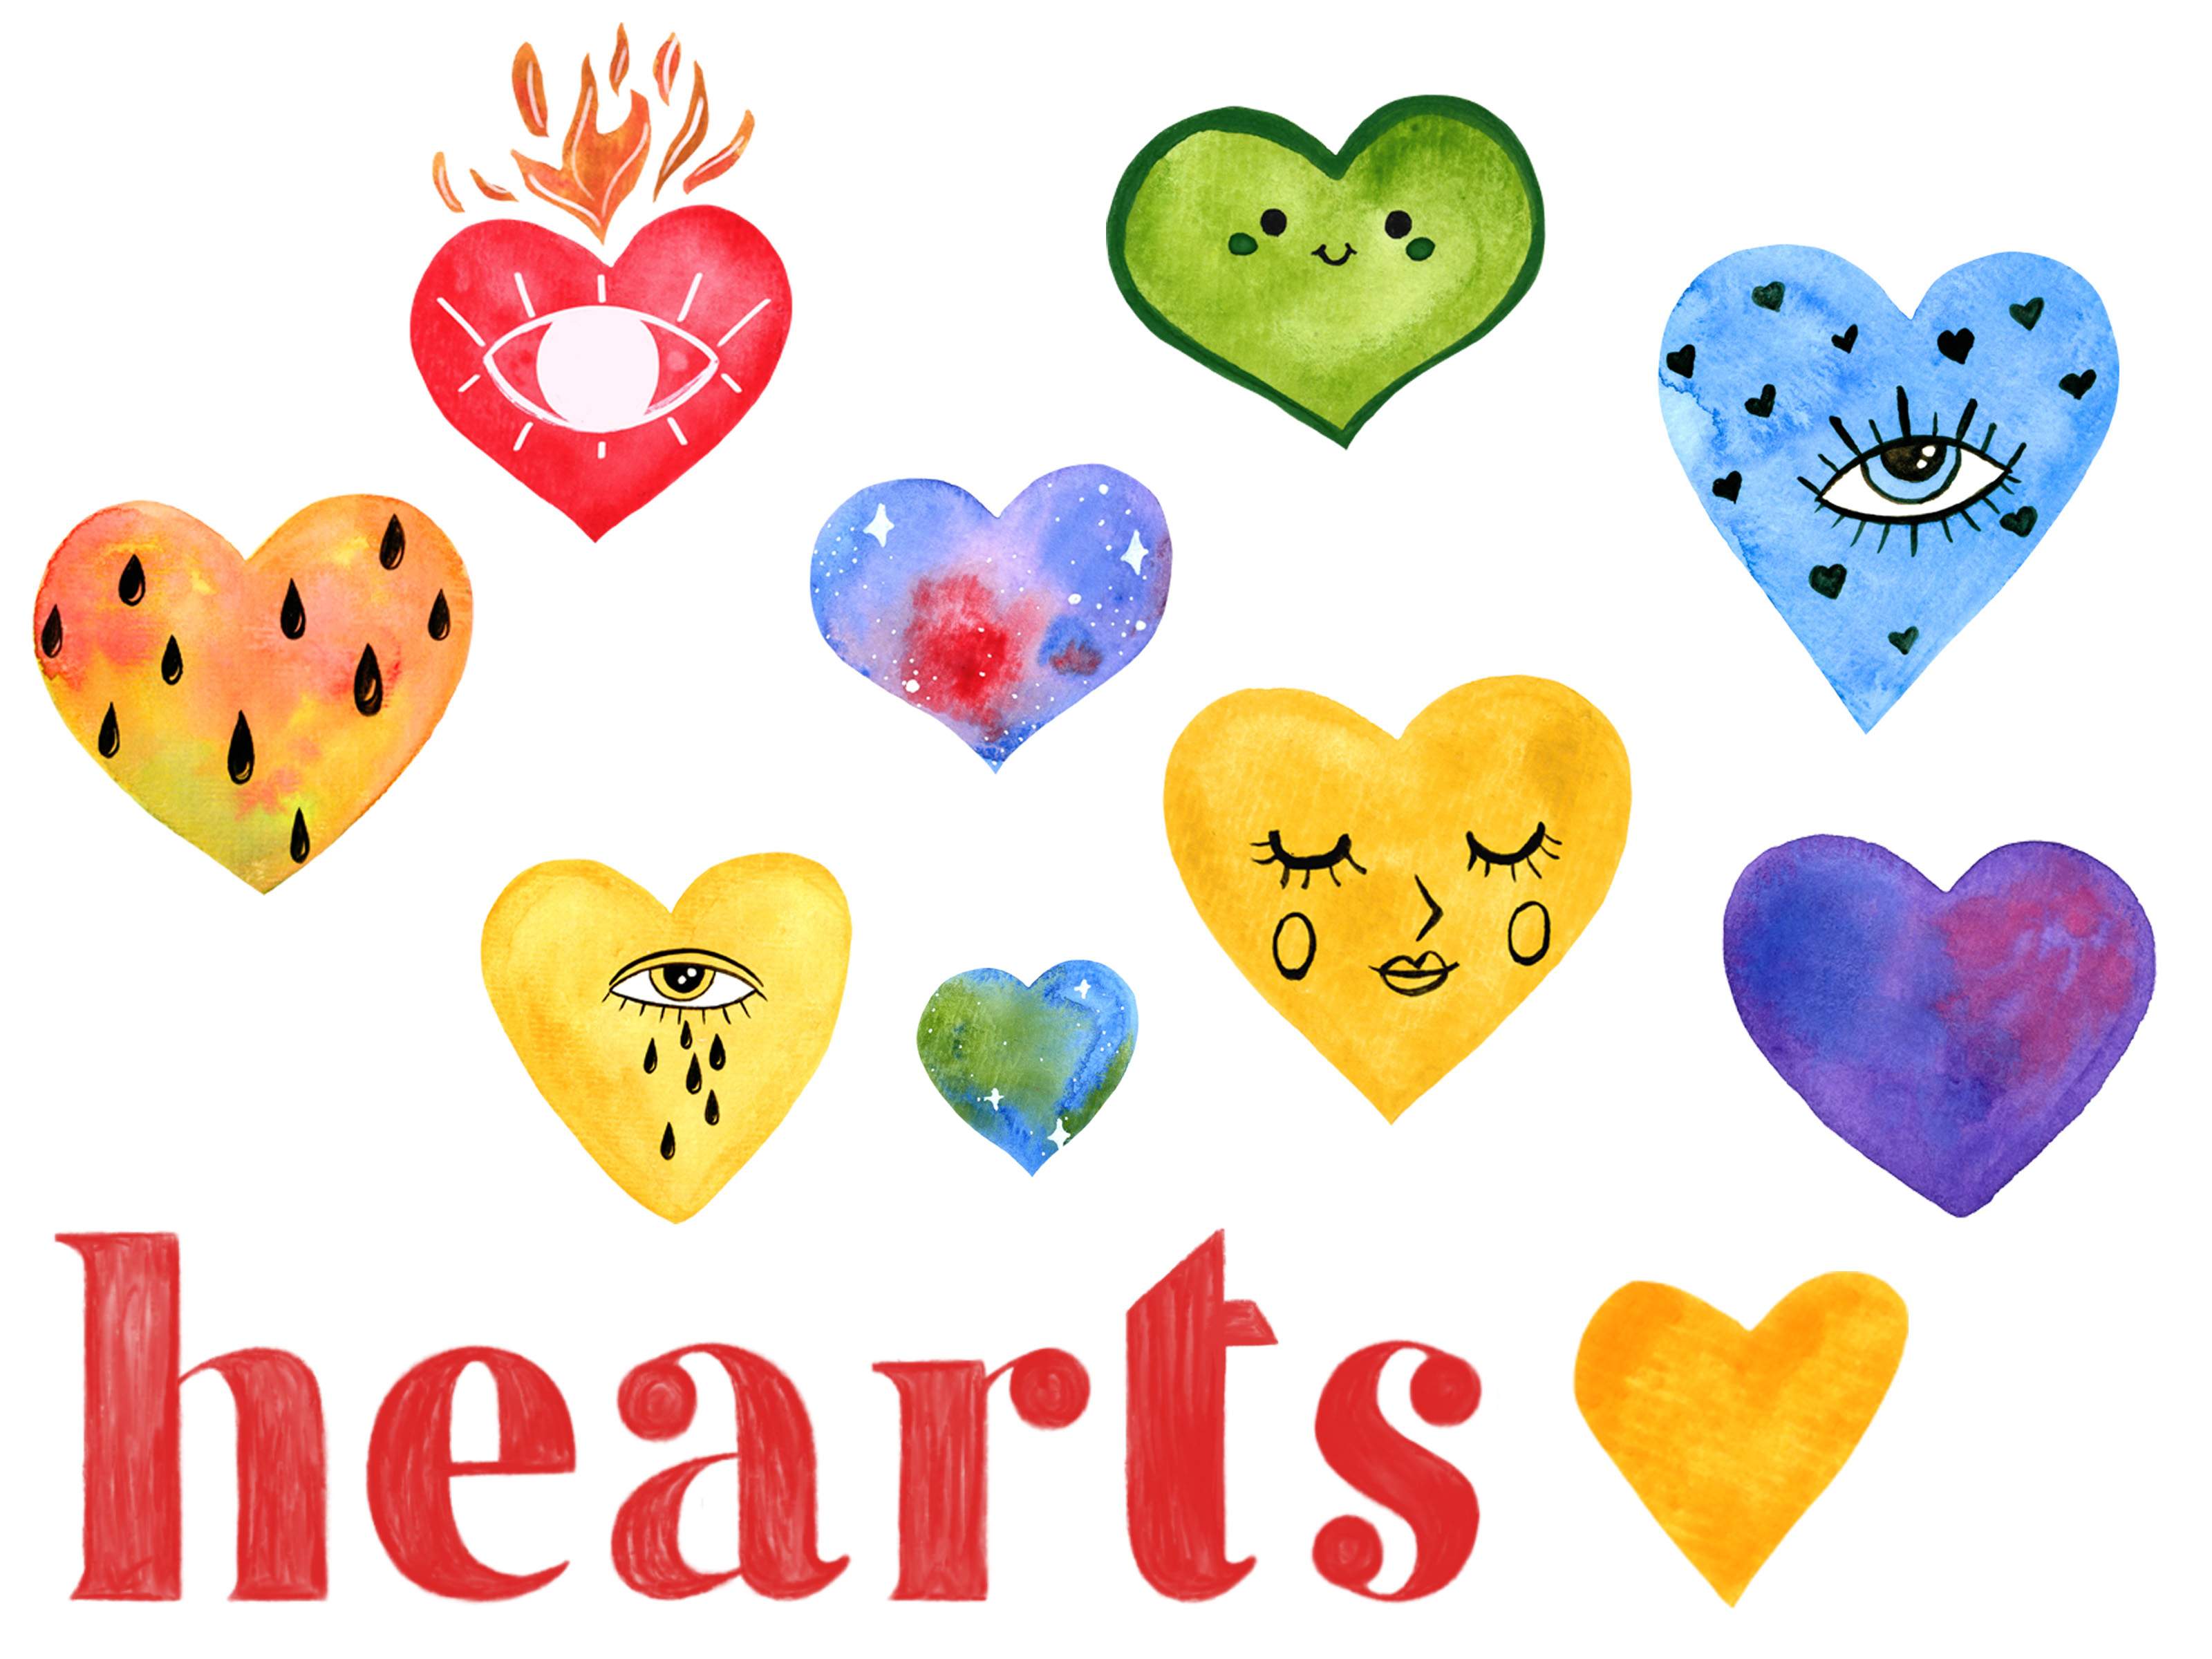 Group of hearts with eyes drawn on them.